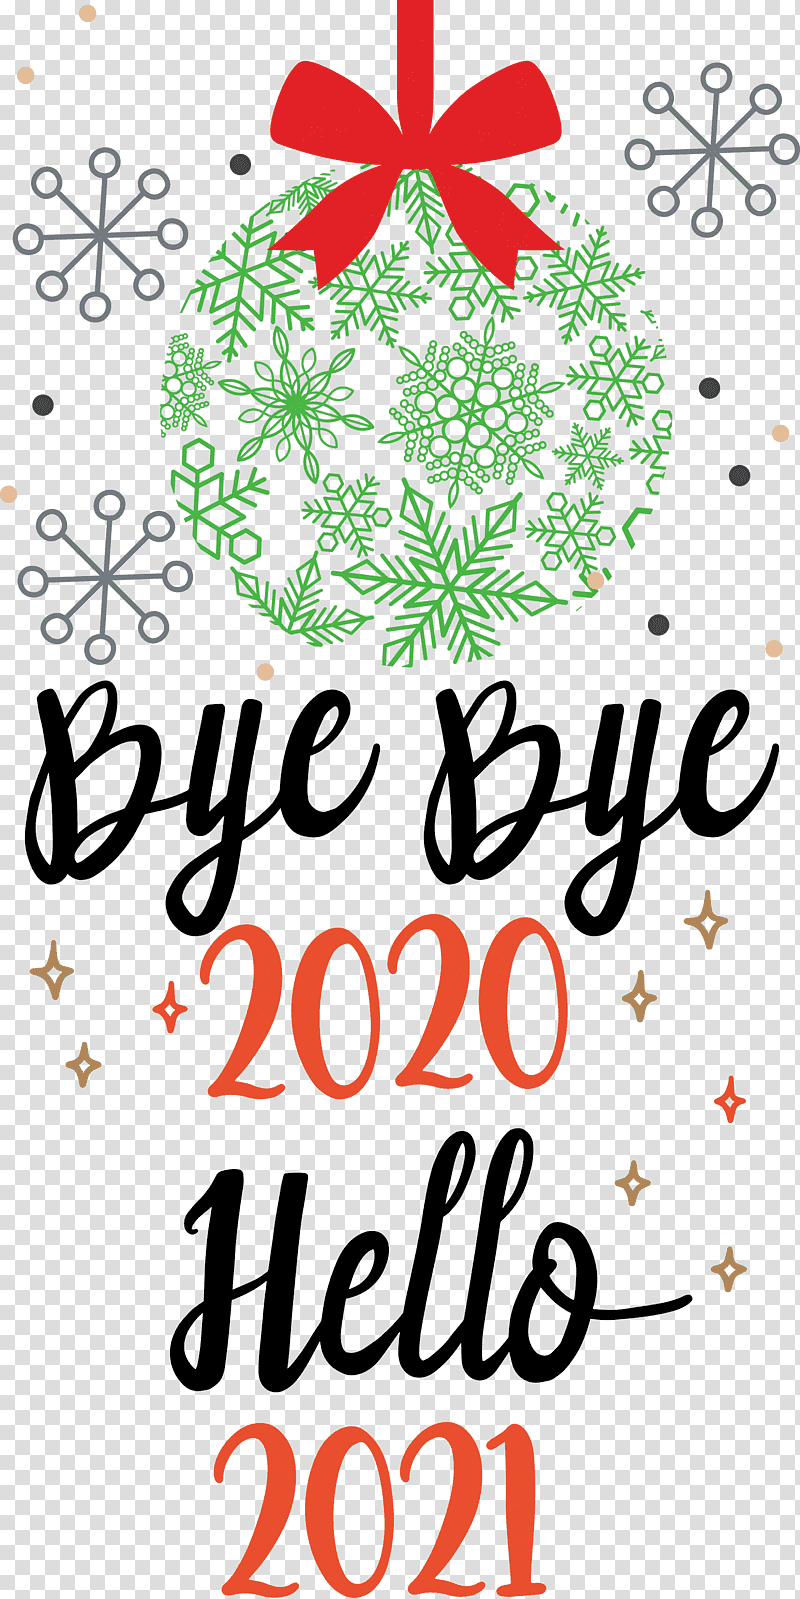 Hello 2021 Year Bye bye 2020 Year, Cover Art, Christmas Day, Drawing, Watercolor Painting, Excellent Art, Ornament transparent background PNG clipart